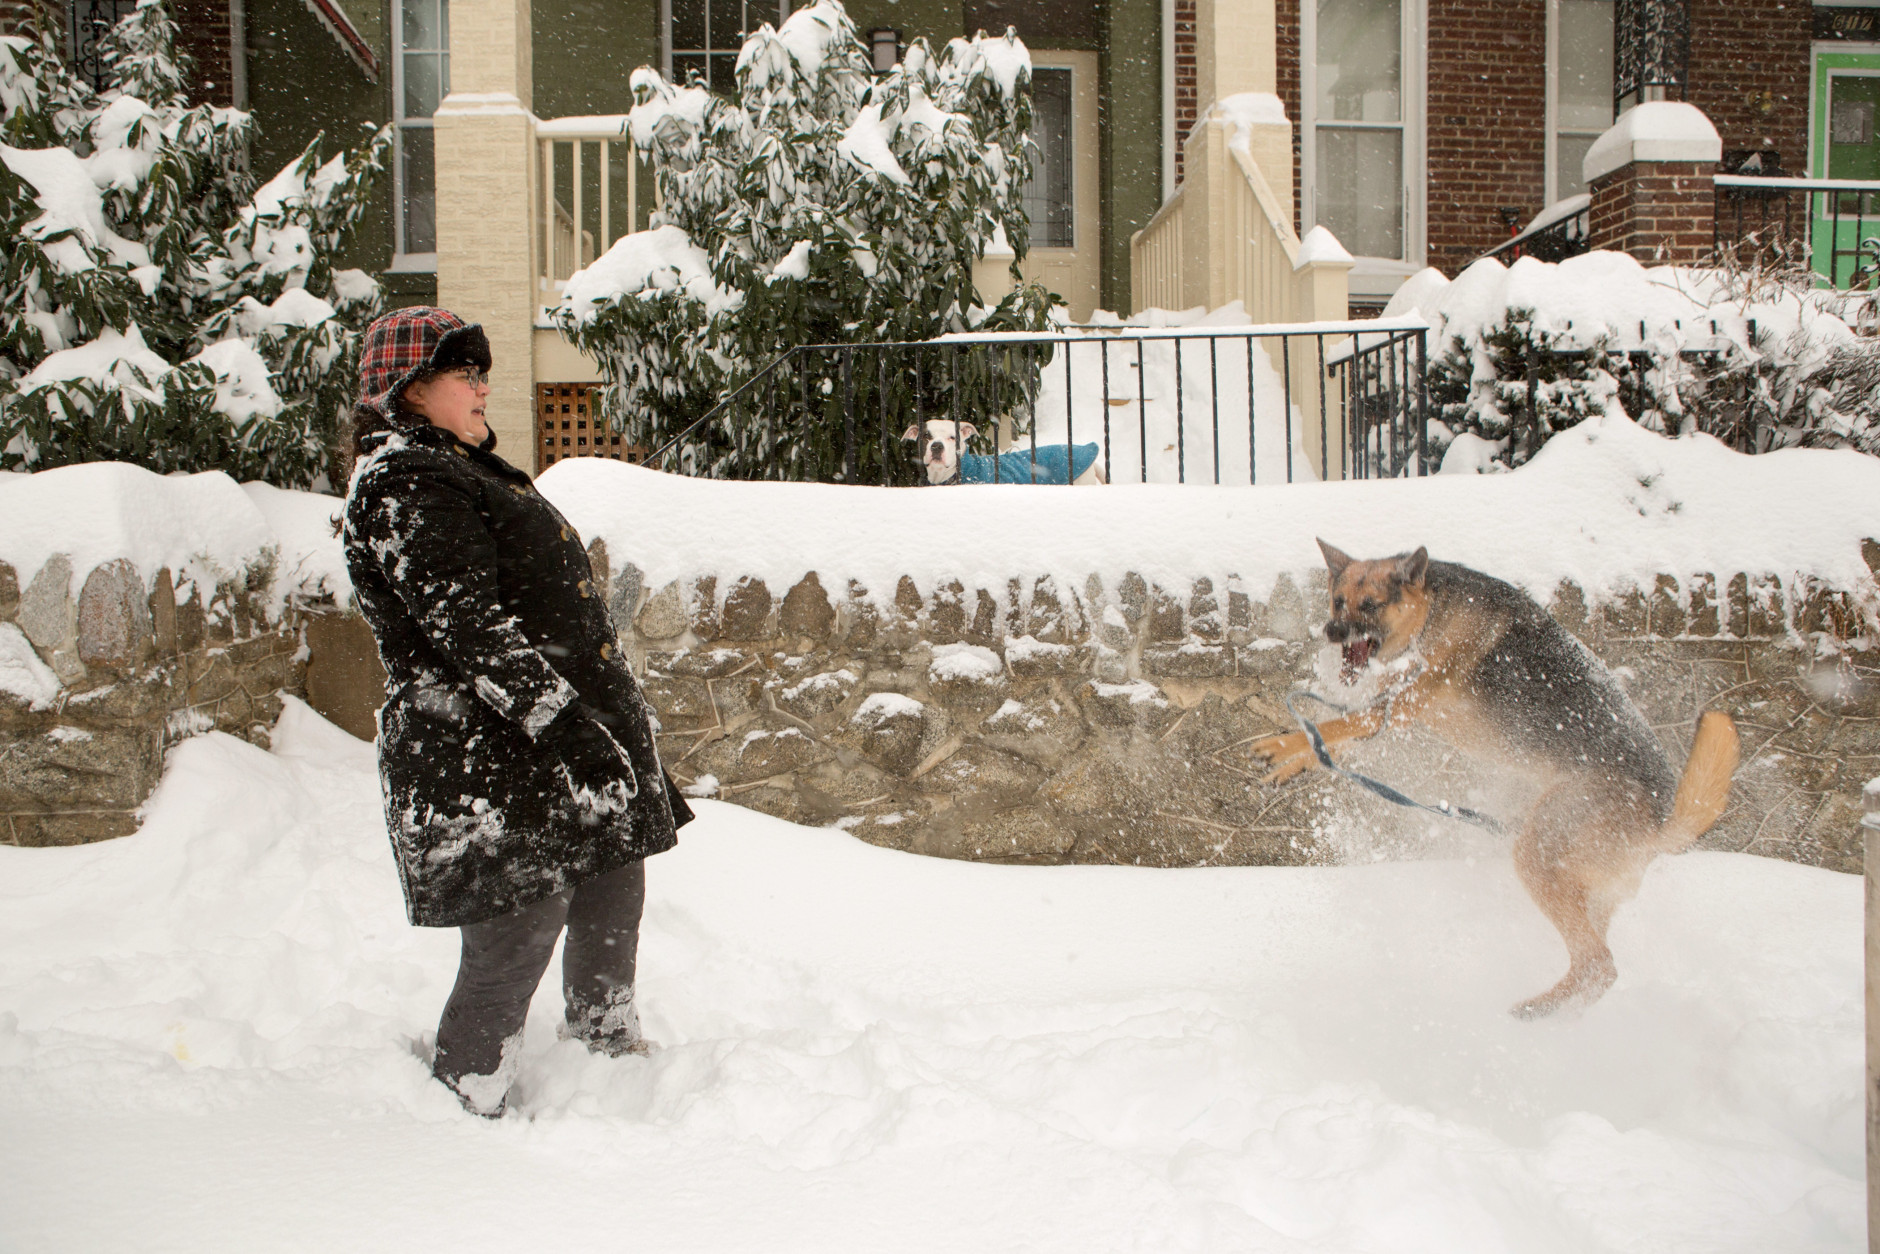 Haley Griffin plays snowball catch with a friend's dog Tallulah, as her dog Piglet, center, looks on in the Parkview neighborhood on January 23, 2016 in Washington, DC. Over a foot of snow has already fallen in the city in the past 24 hours, in what experts say could be a record-breaking storm.  (Photo by Allison Shelley/Getty Images)